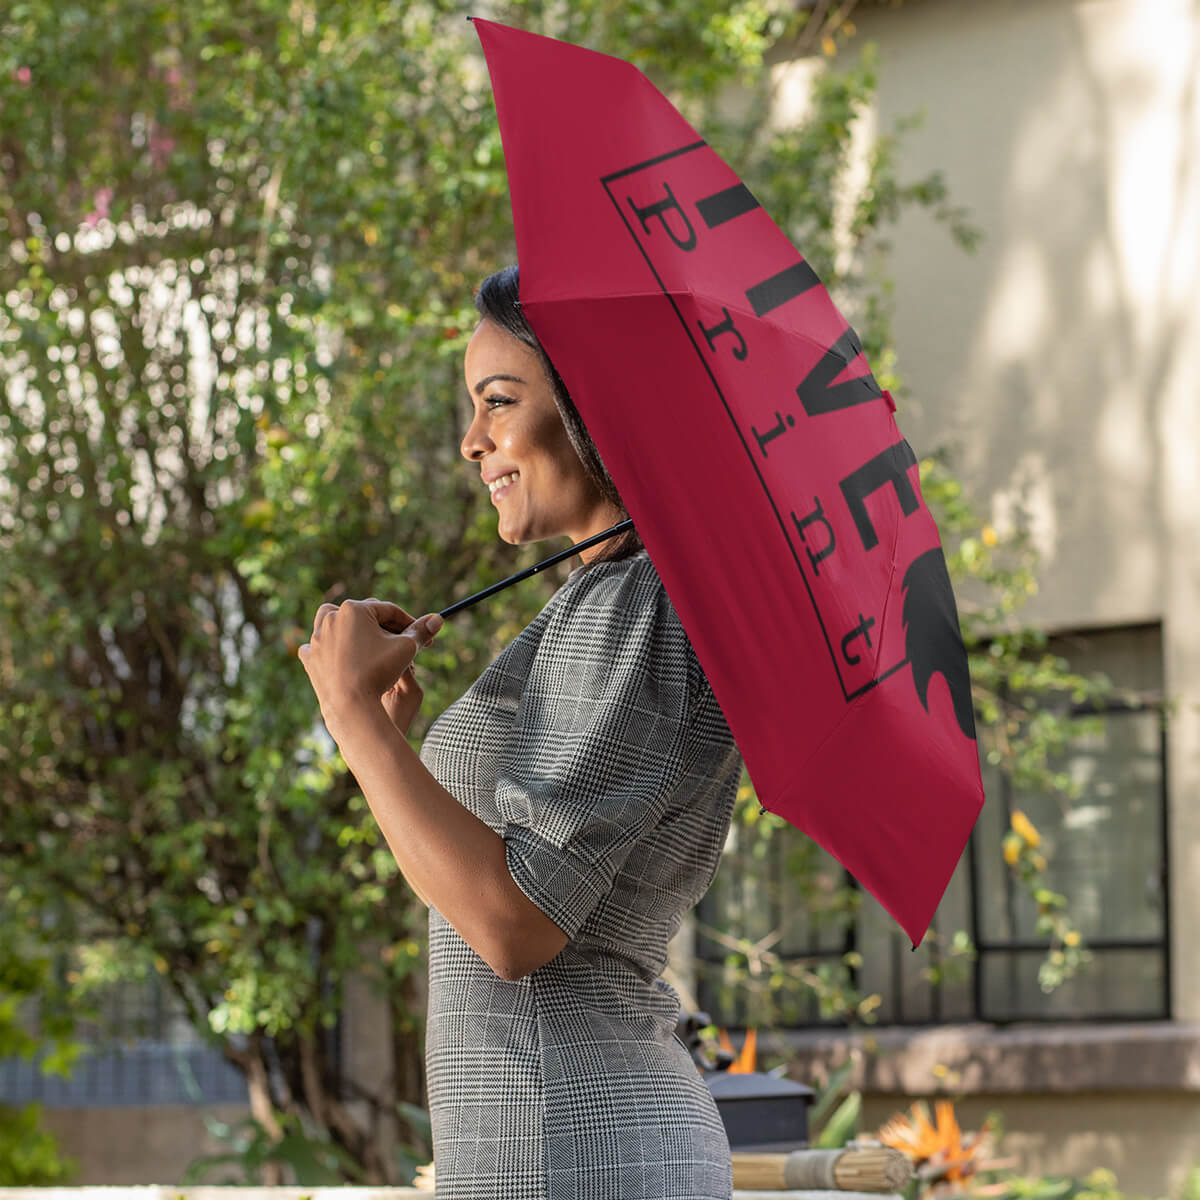 Business woman holding red folding umbrella promotional umbrellas by curative printing